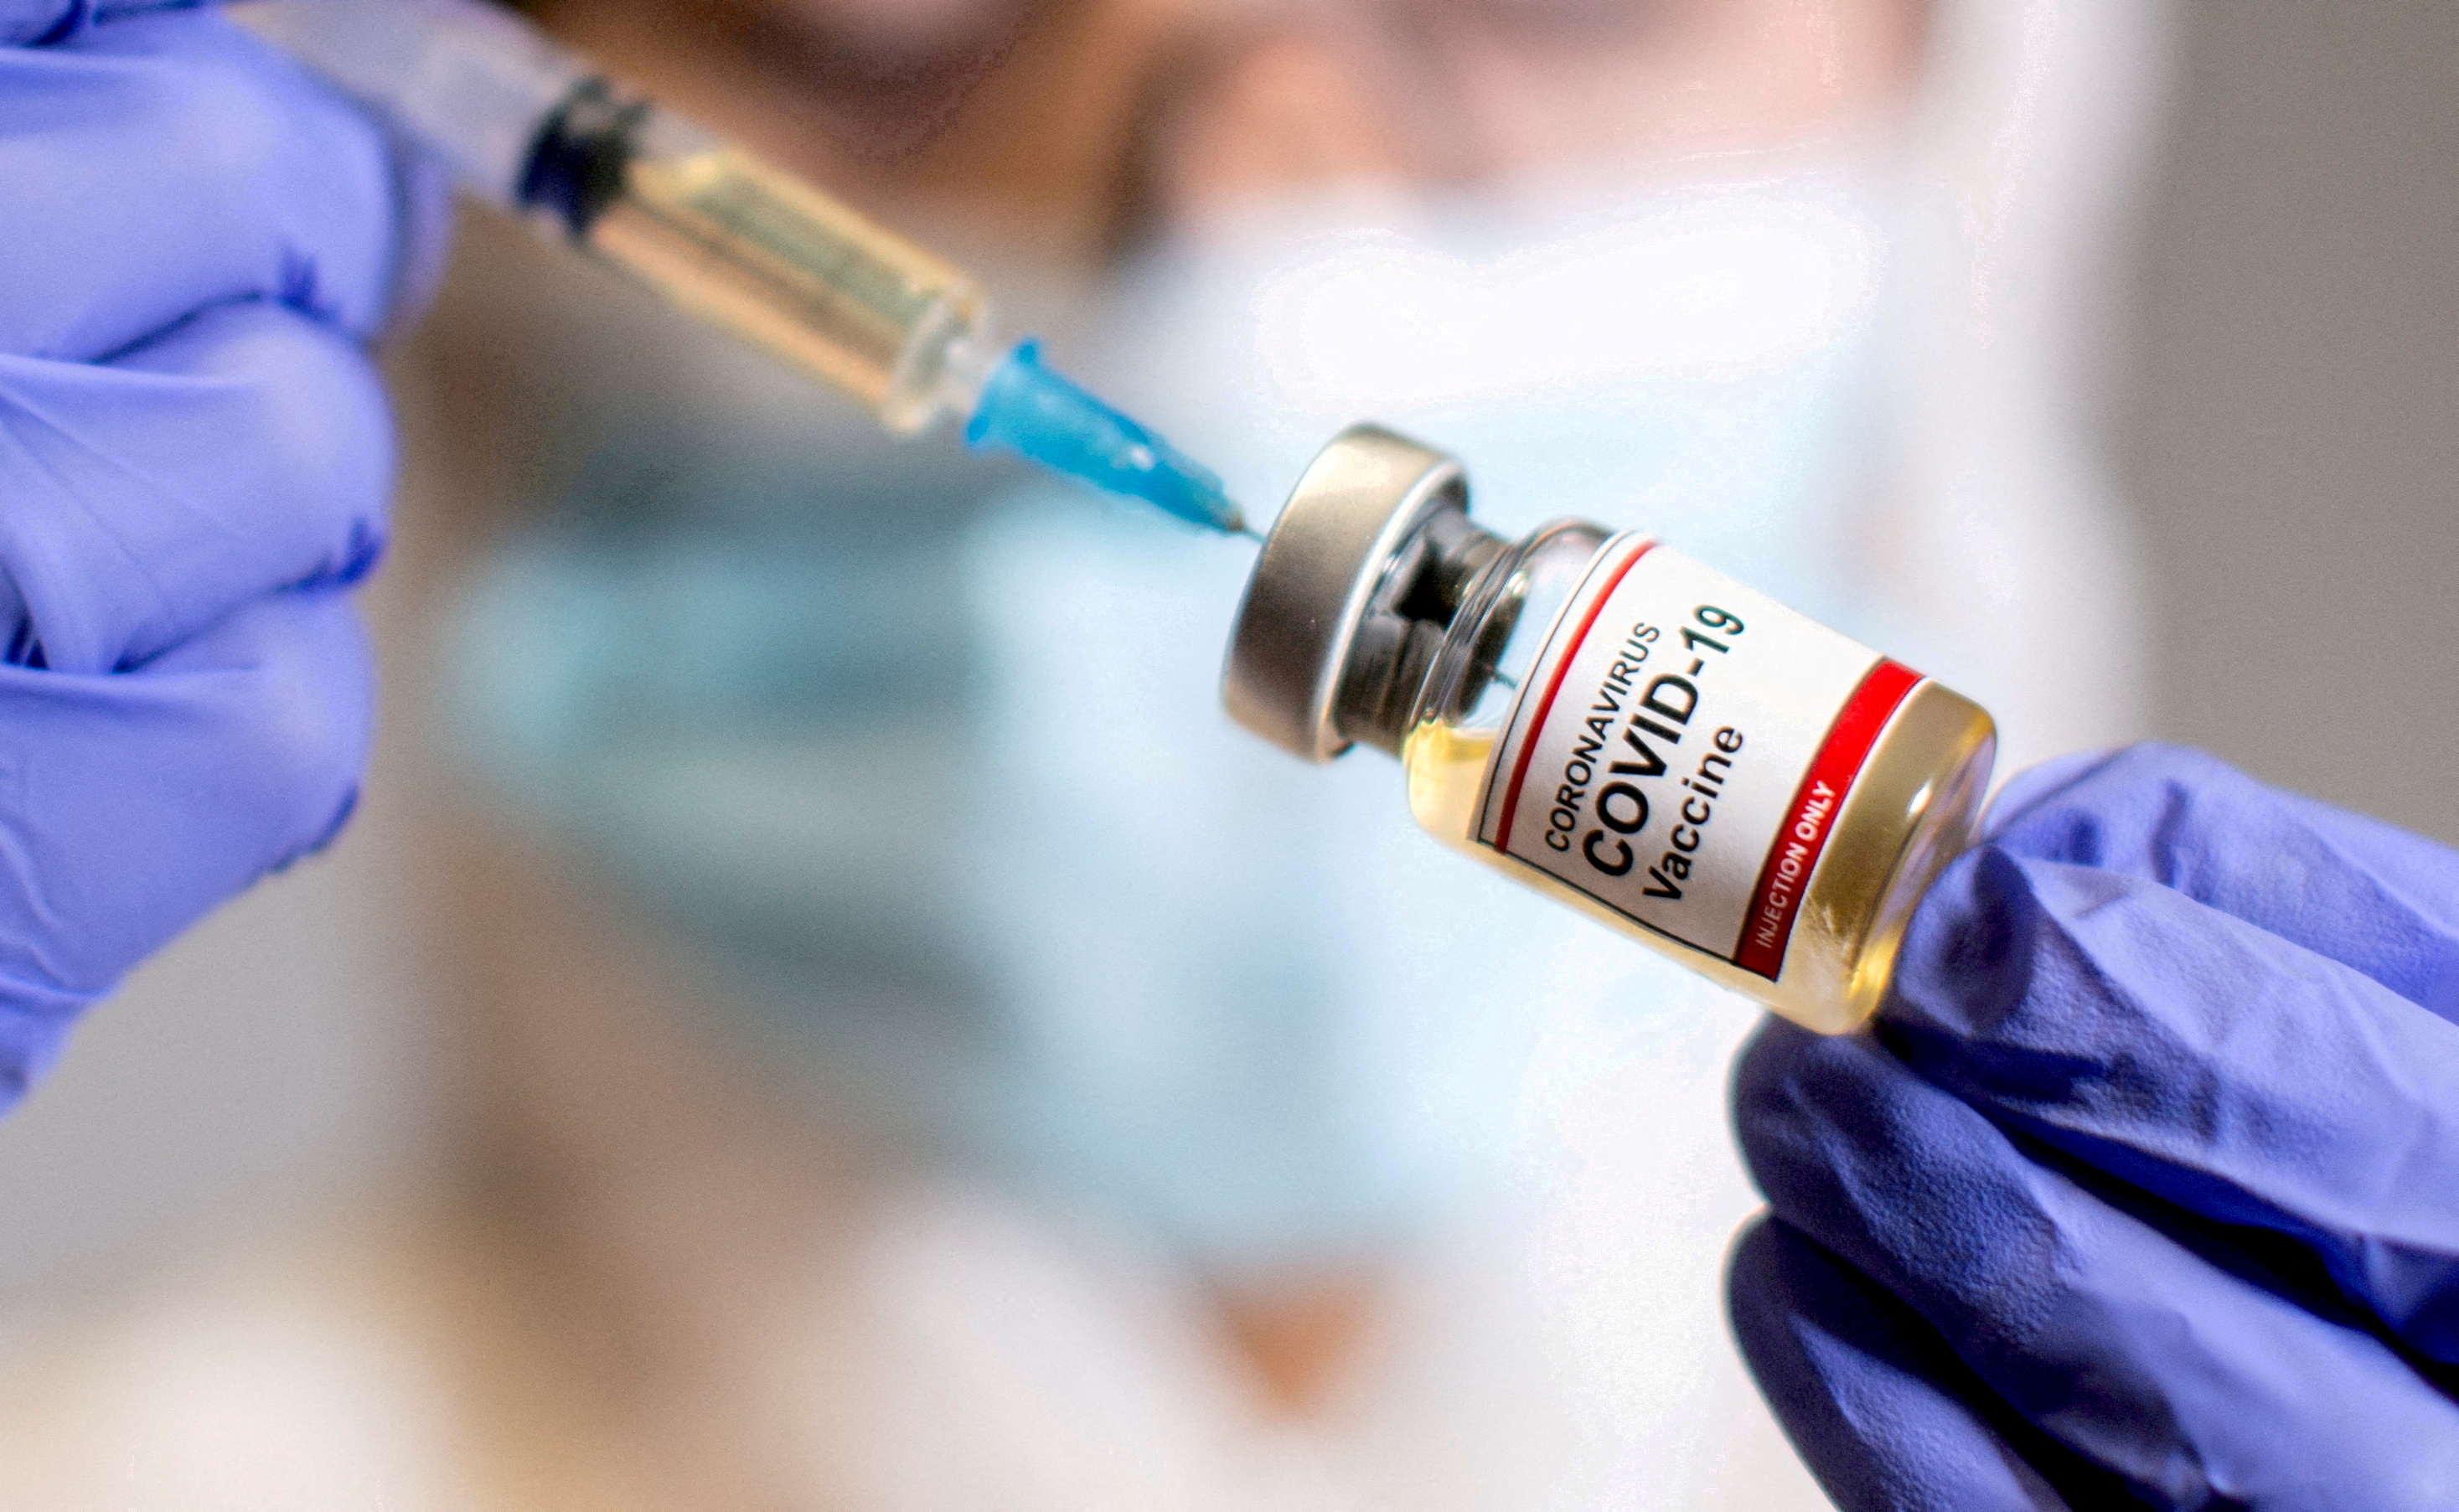 FILE PHOTO: A woman holds a medical syringe and a small bottle labelled "Coronavirus COVID-19 Vaccine